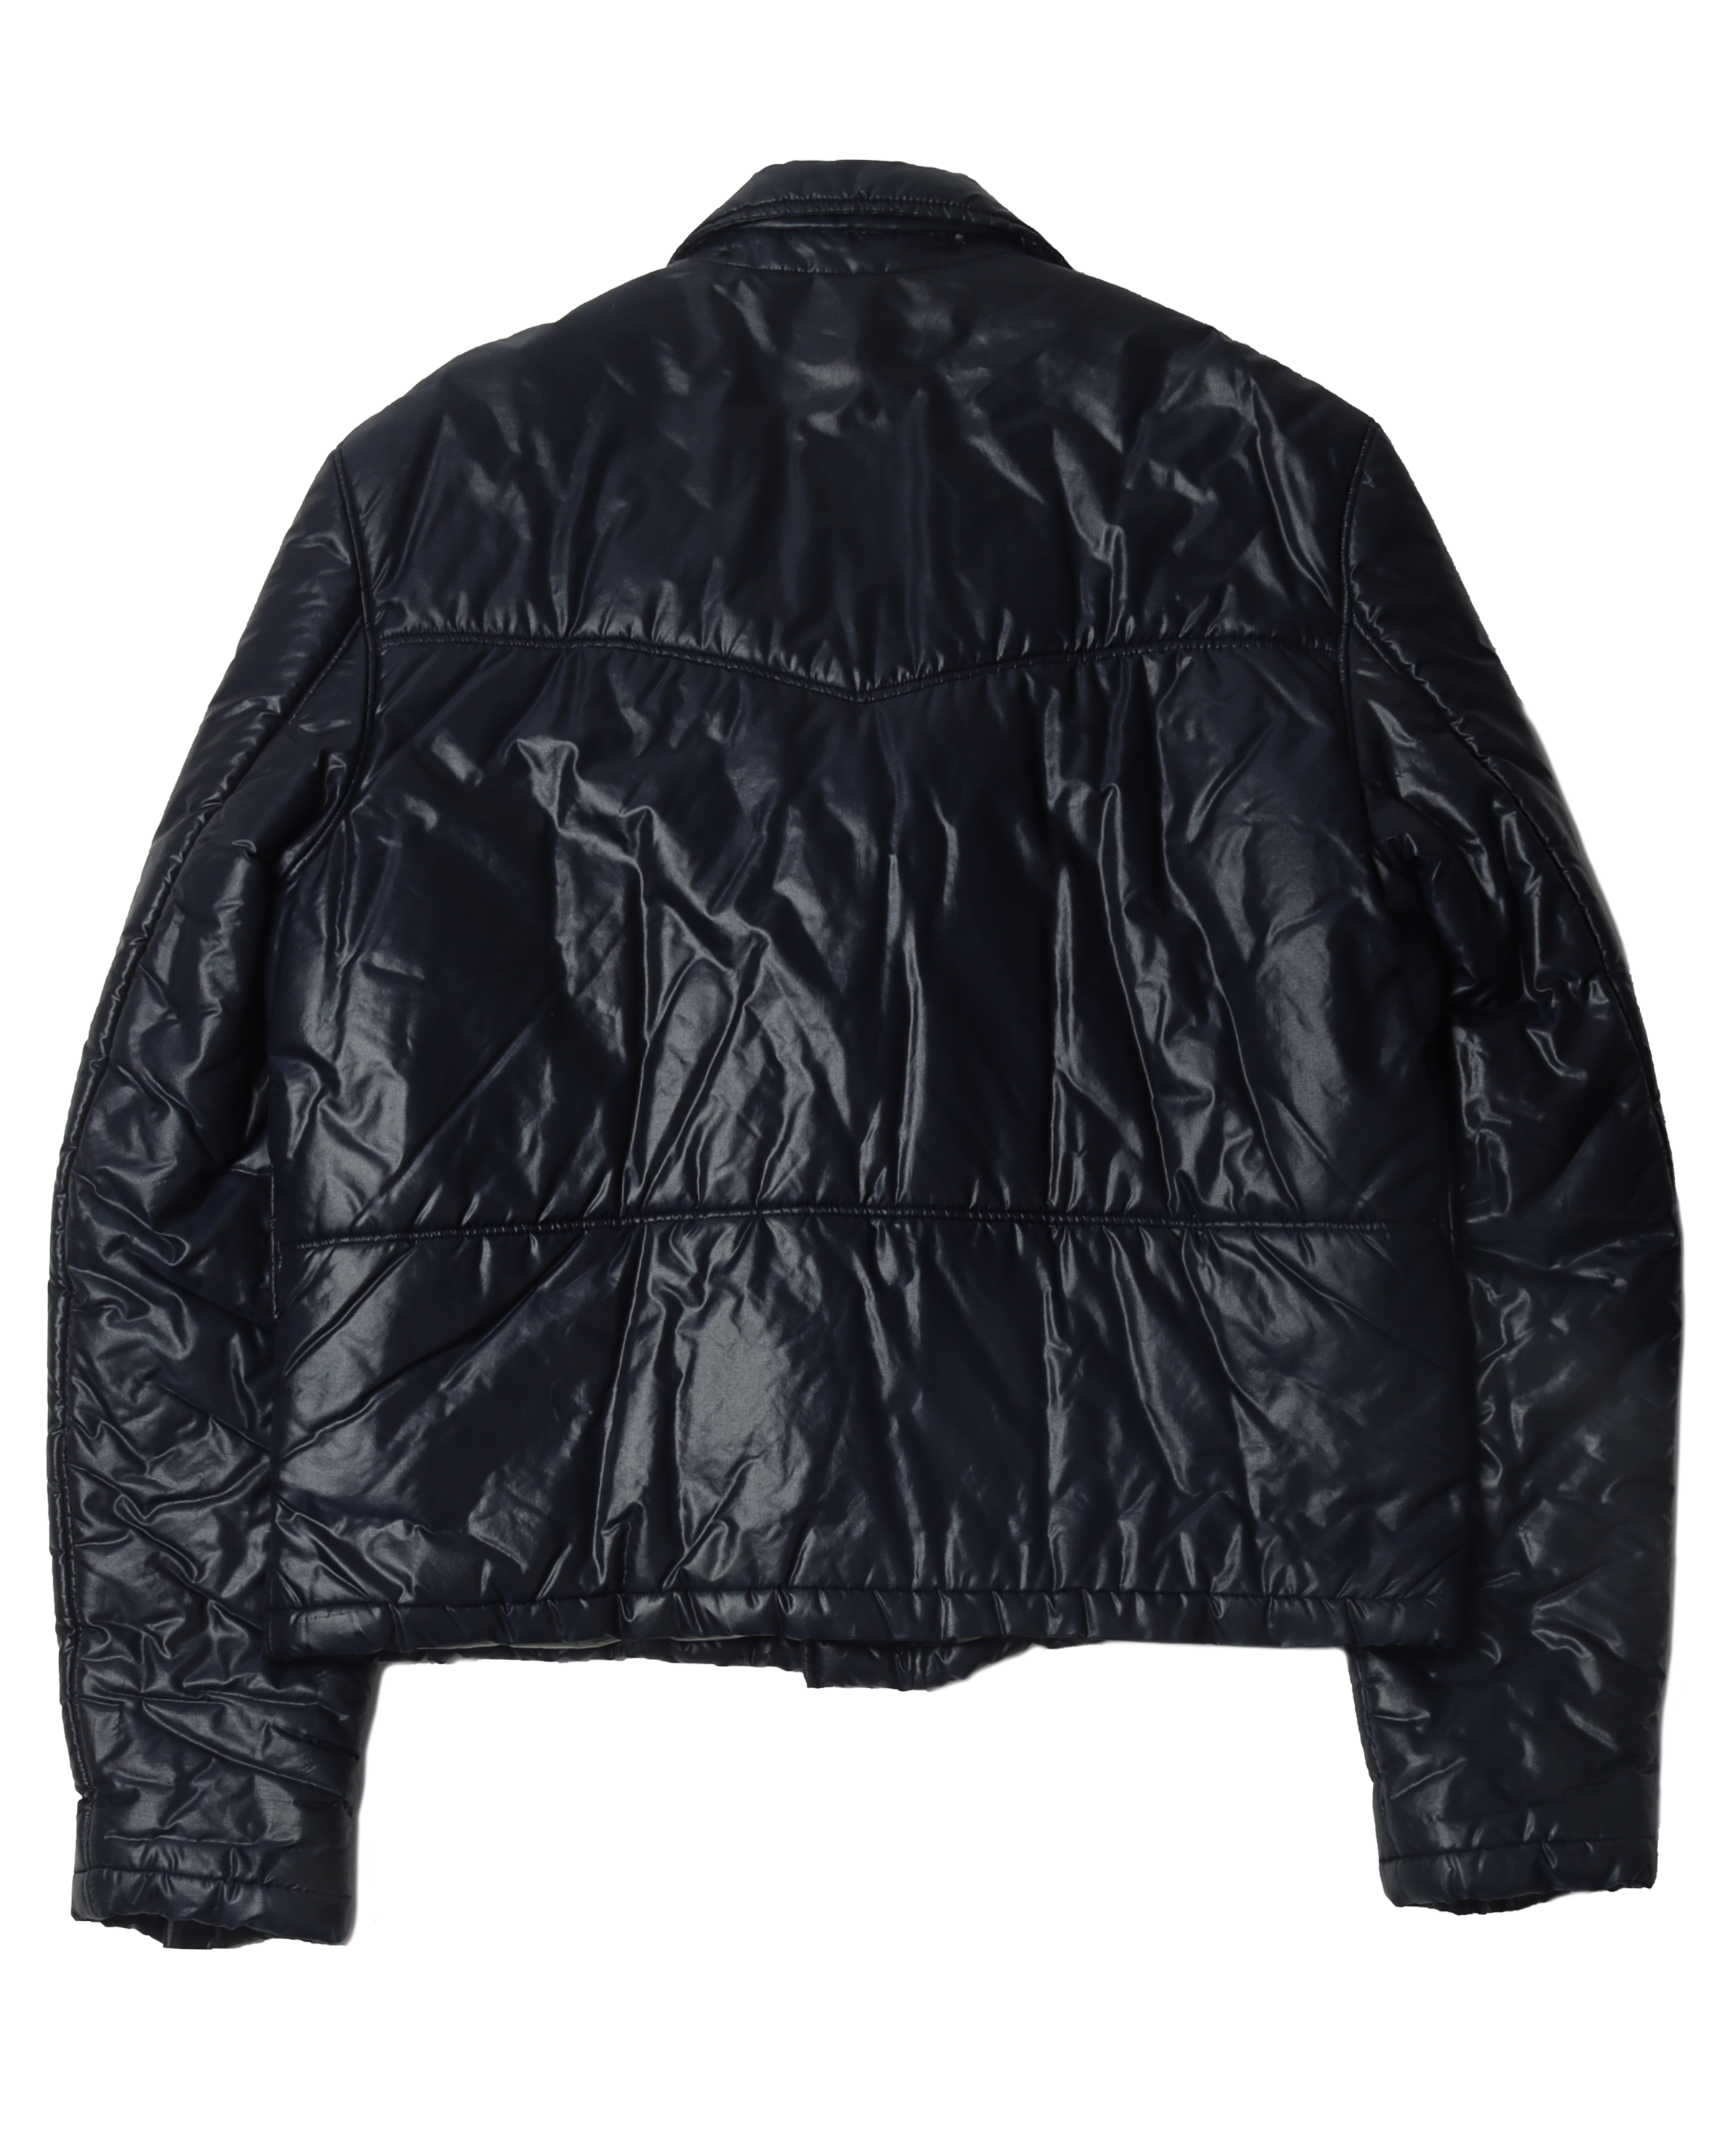 AW03 "Closer" Puffer Motorcycle Jacket